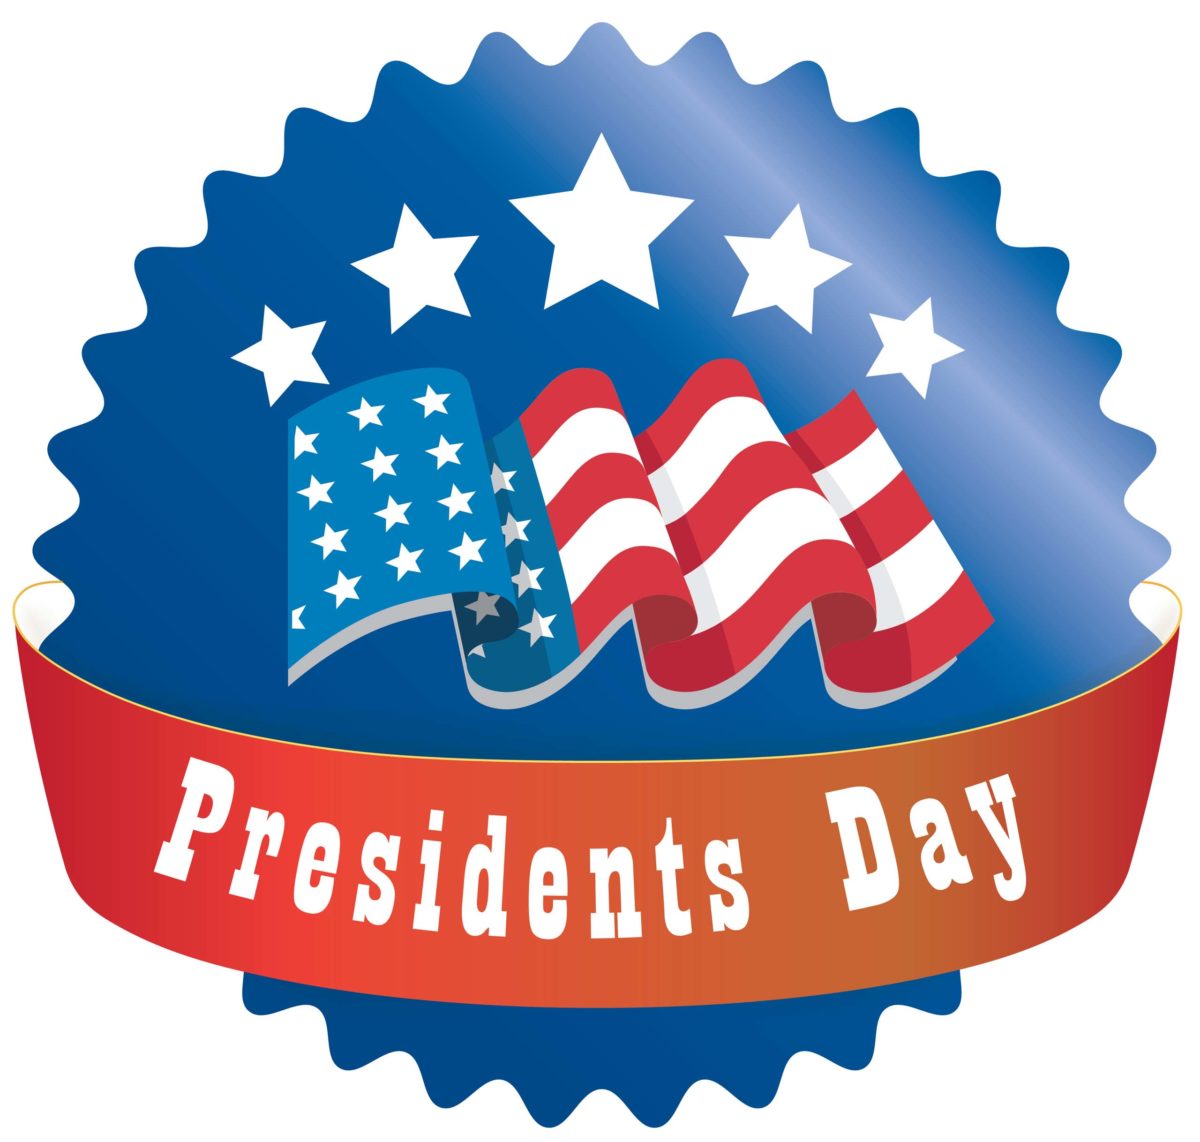 President's Day Wallpapers on 2015 in HD